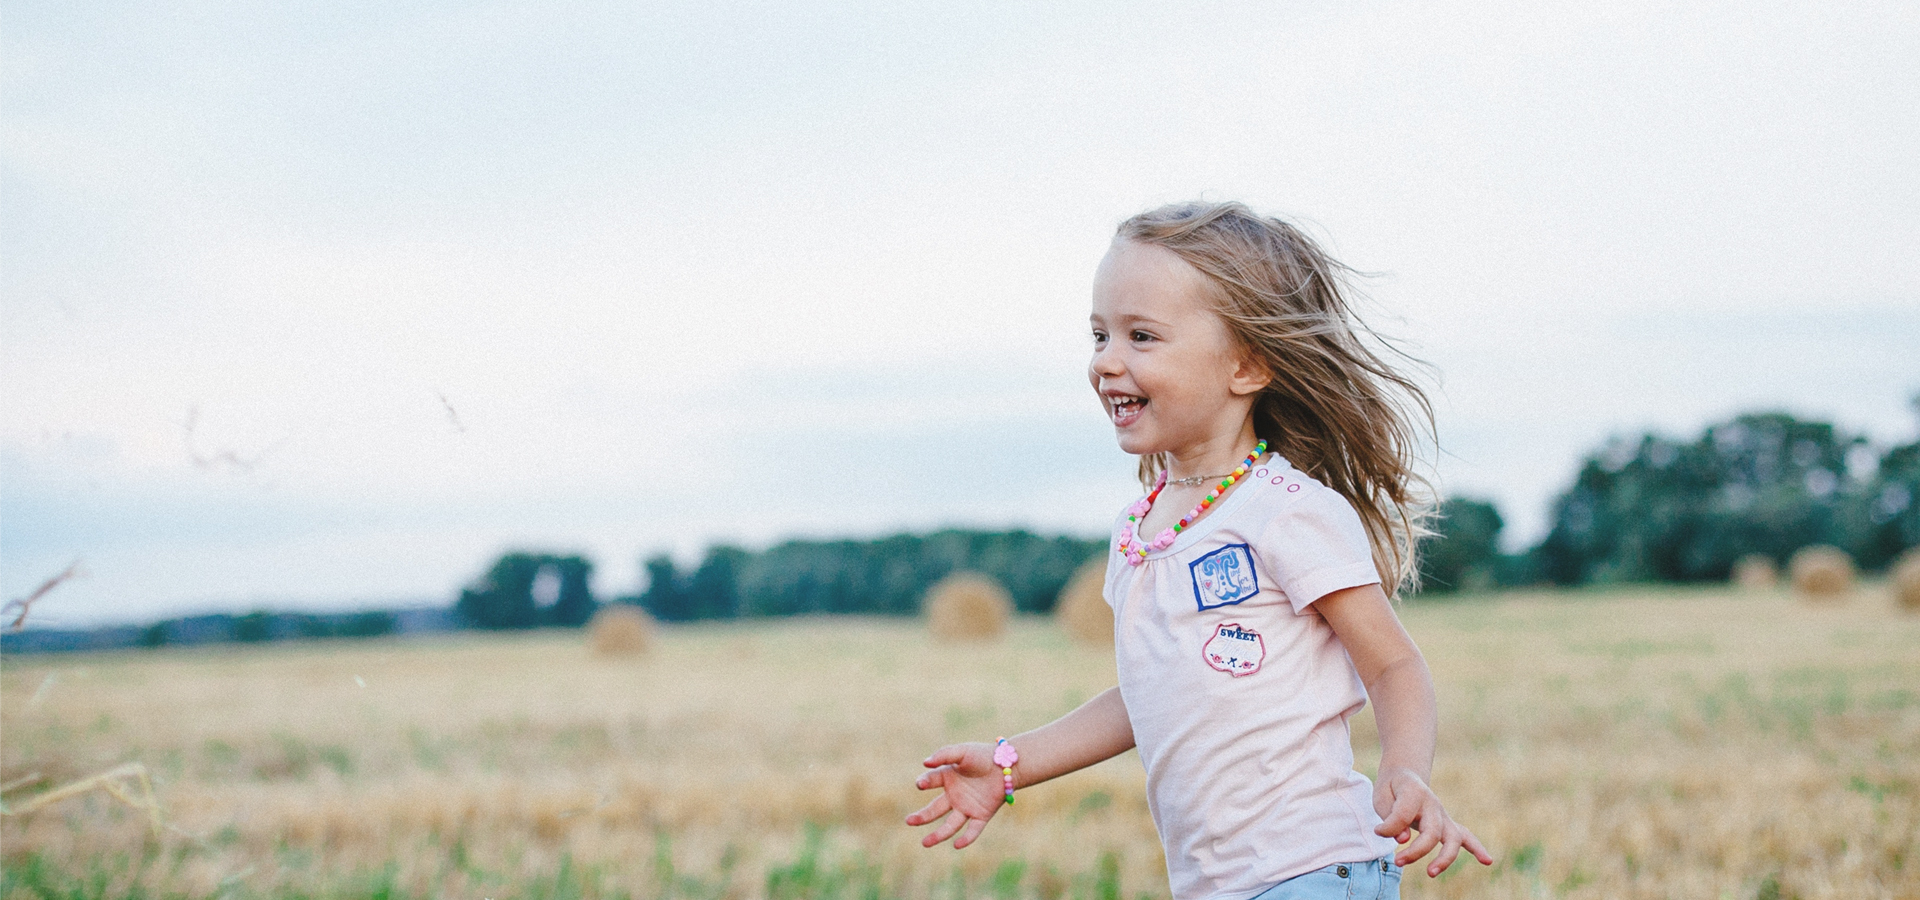 Young girl smiling and running through a field